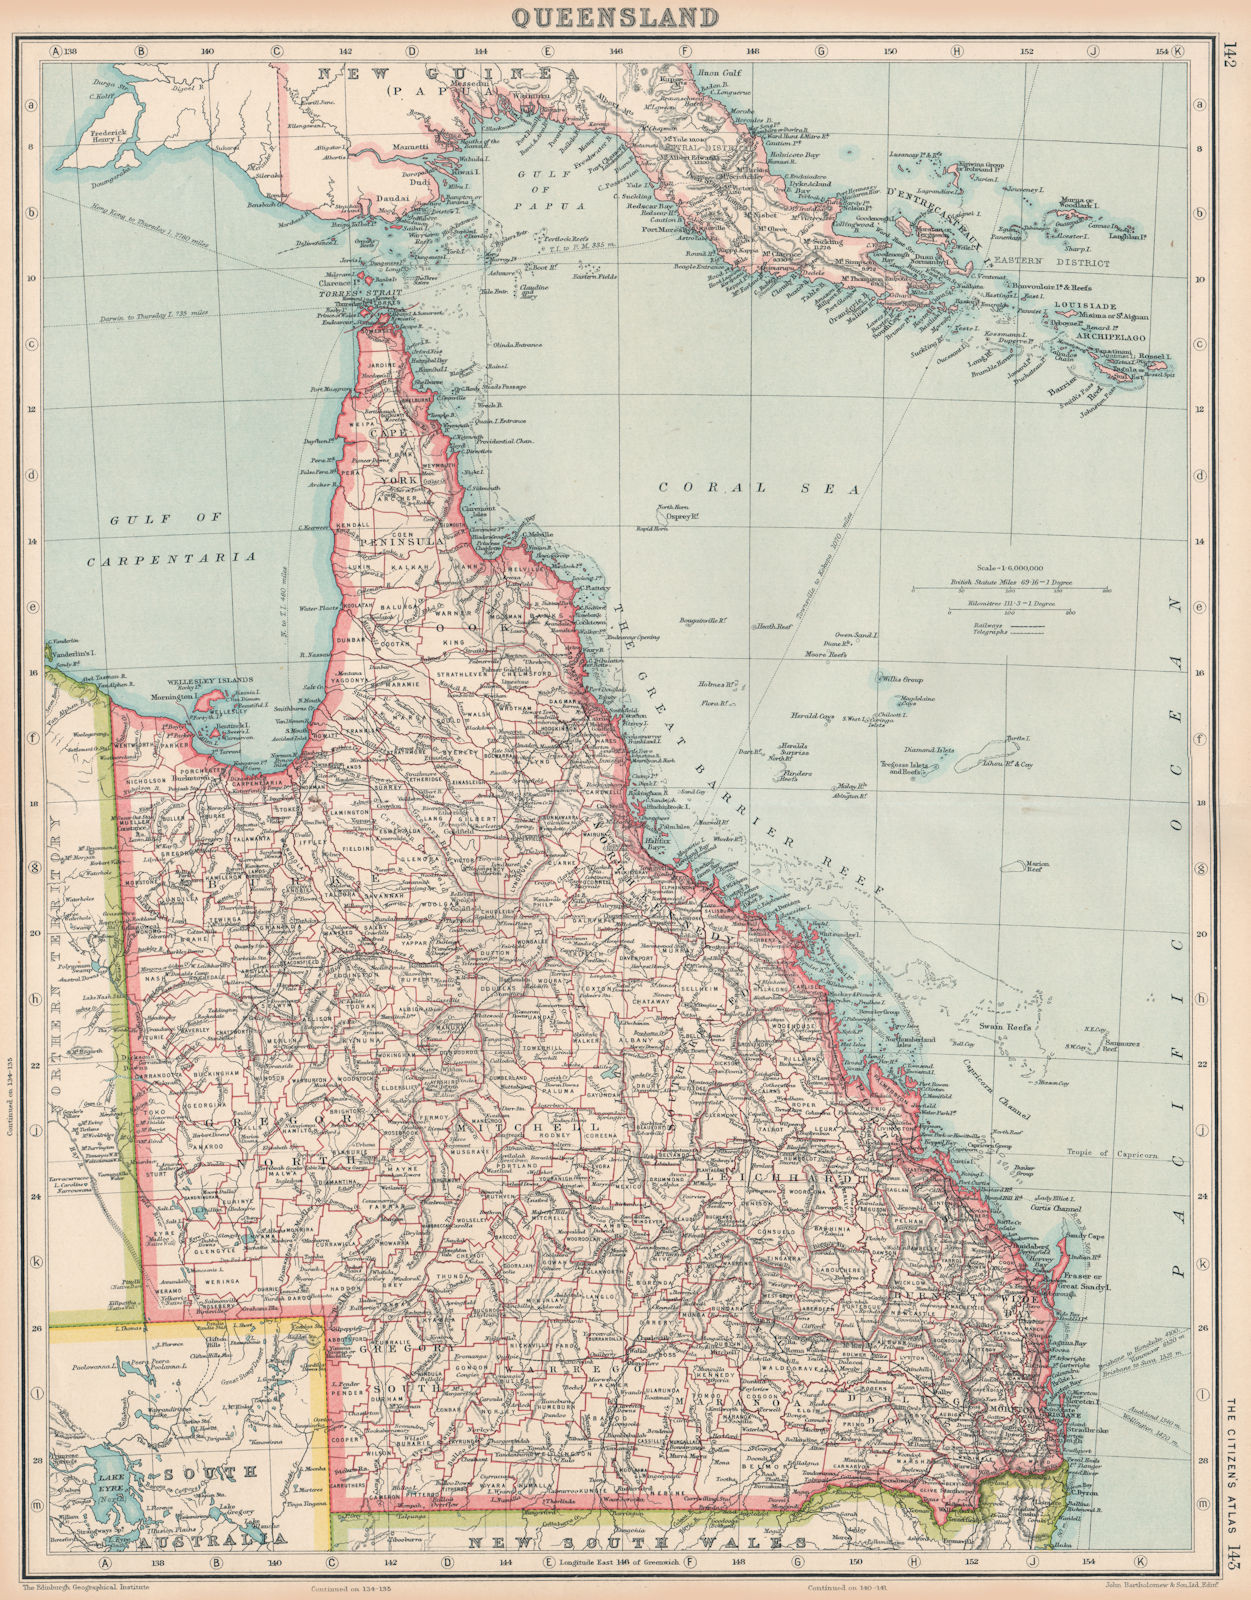 Associate Product QUEENSLAND. State map showing counties. Australia. BARTHOLOMEW 1924 old